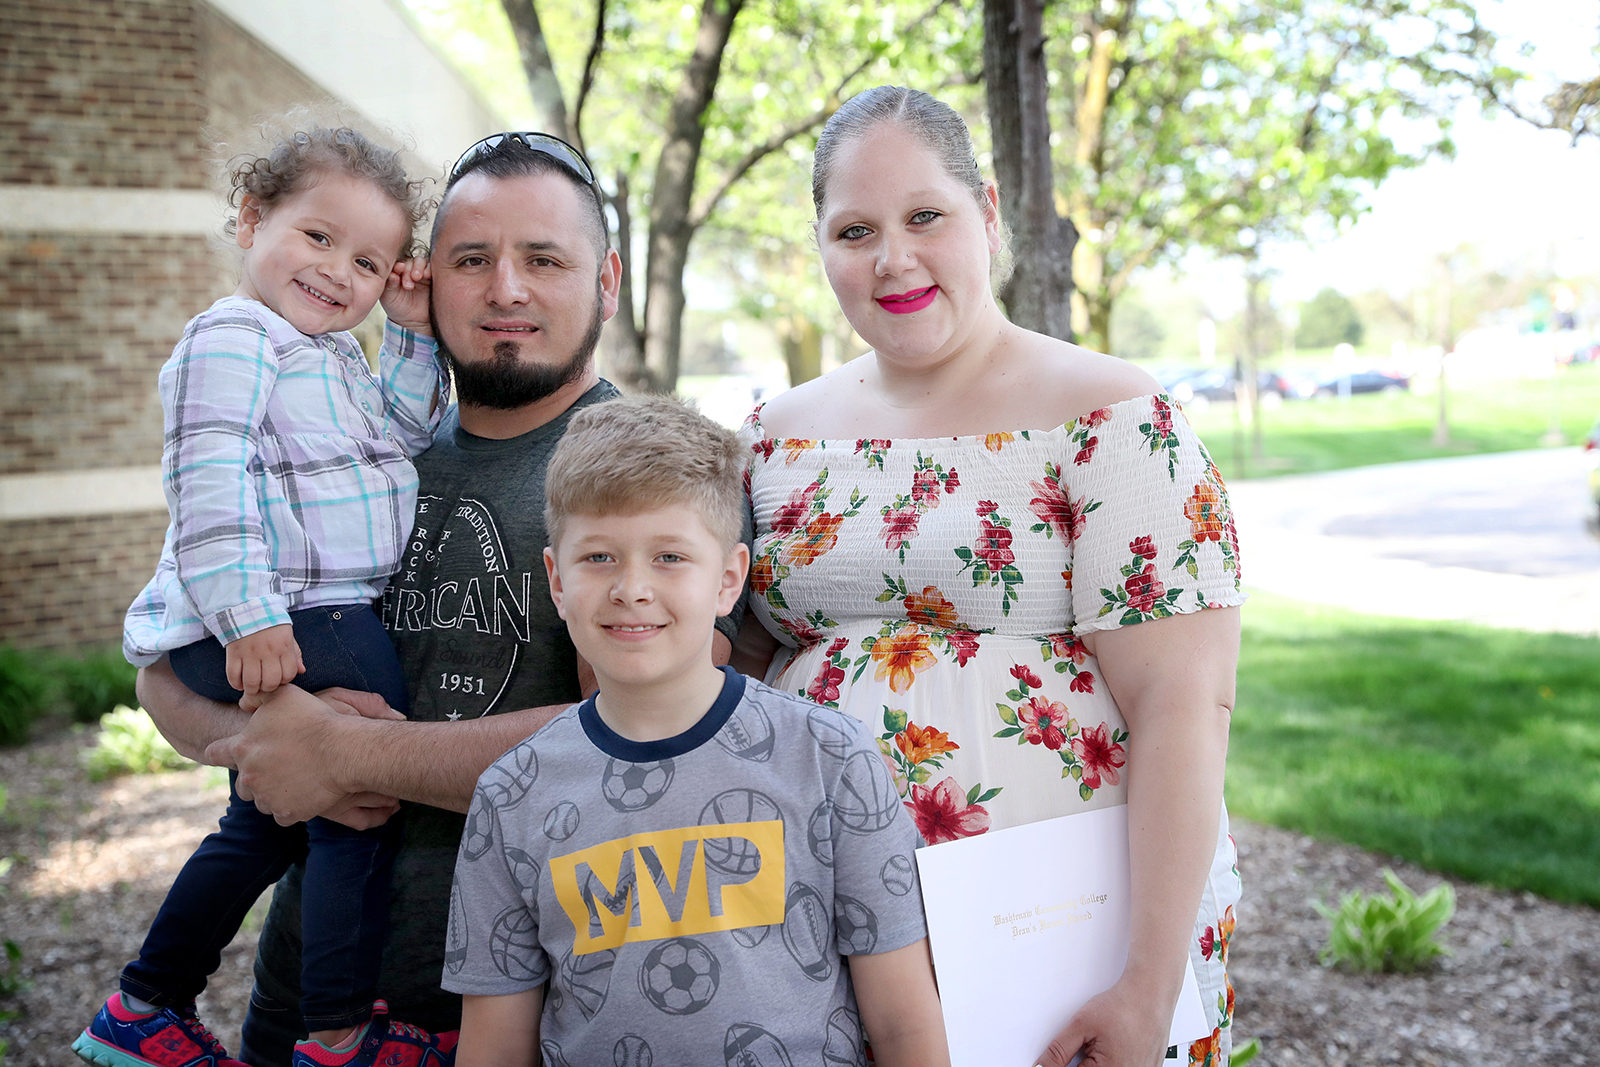 WCC graduate Mia Guzman (right) with her husband Pedro, son Christian and daughter Brielle after the Spring Honors Convocation. (Photo by Kelly Gampel)